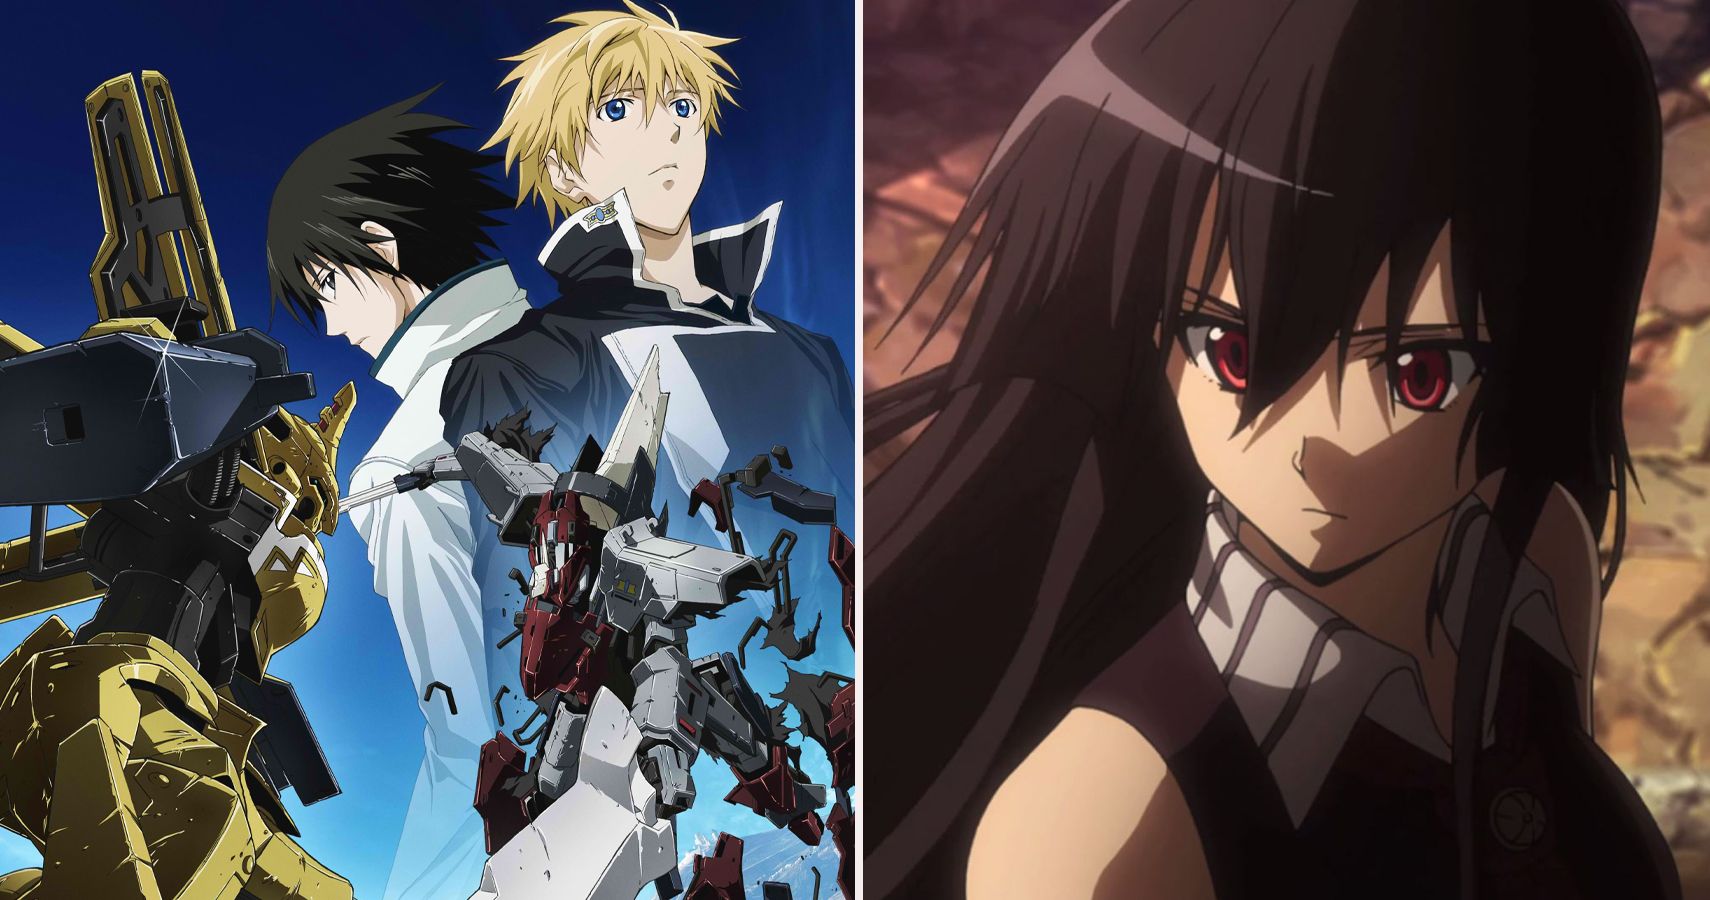 5 2010s Fantasy Anime That Got Overlooked (& 5 That Were Way Too Popular)